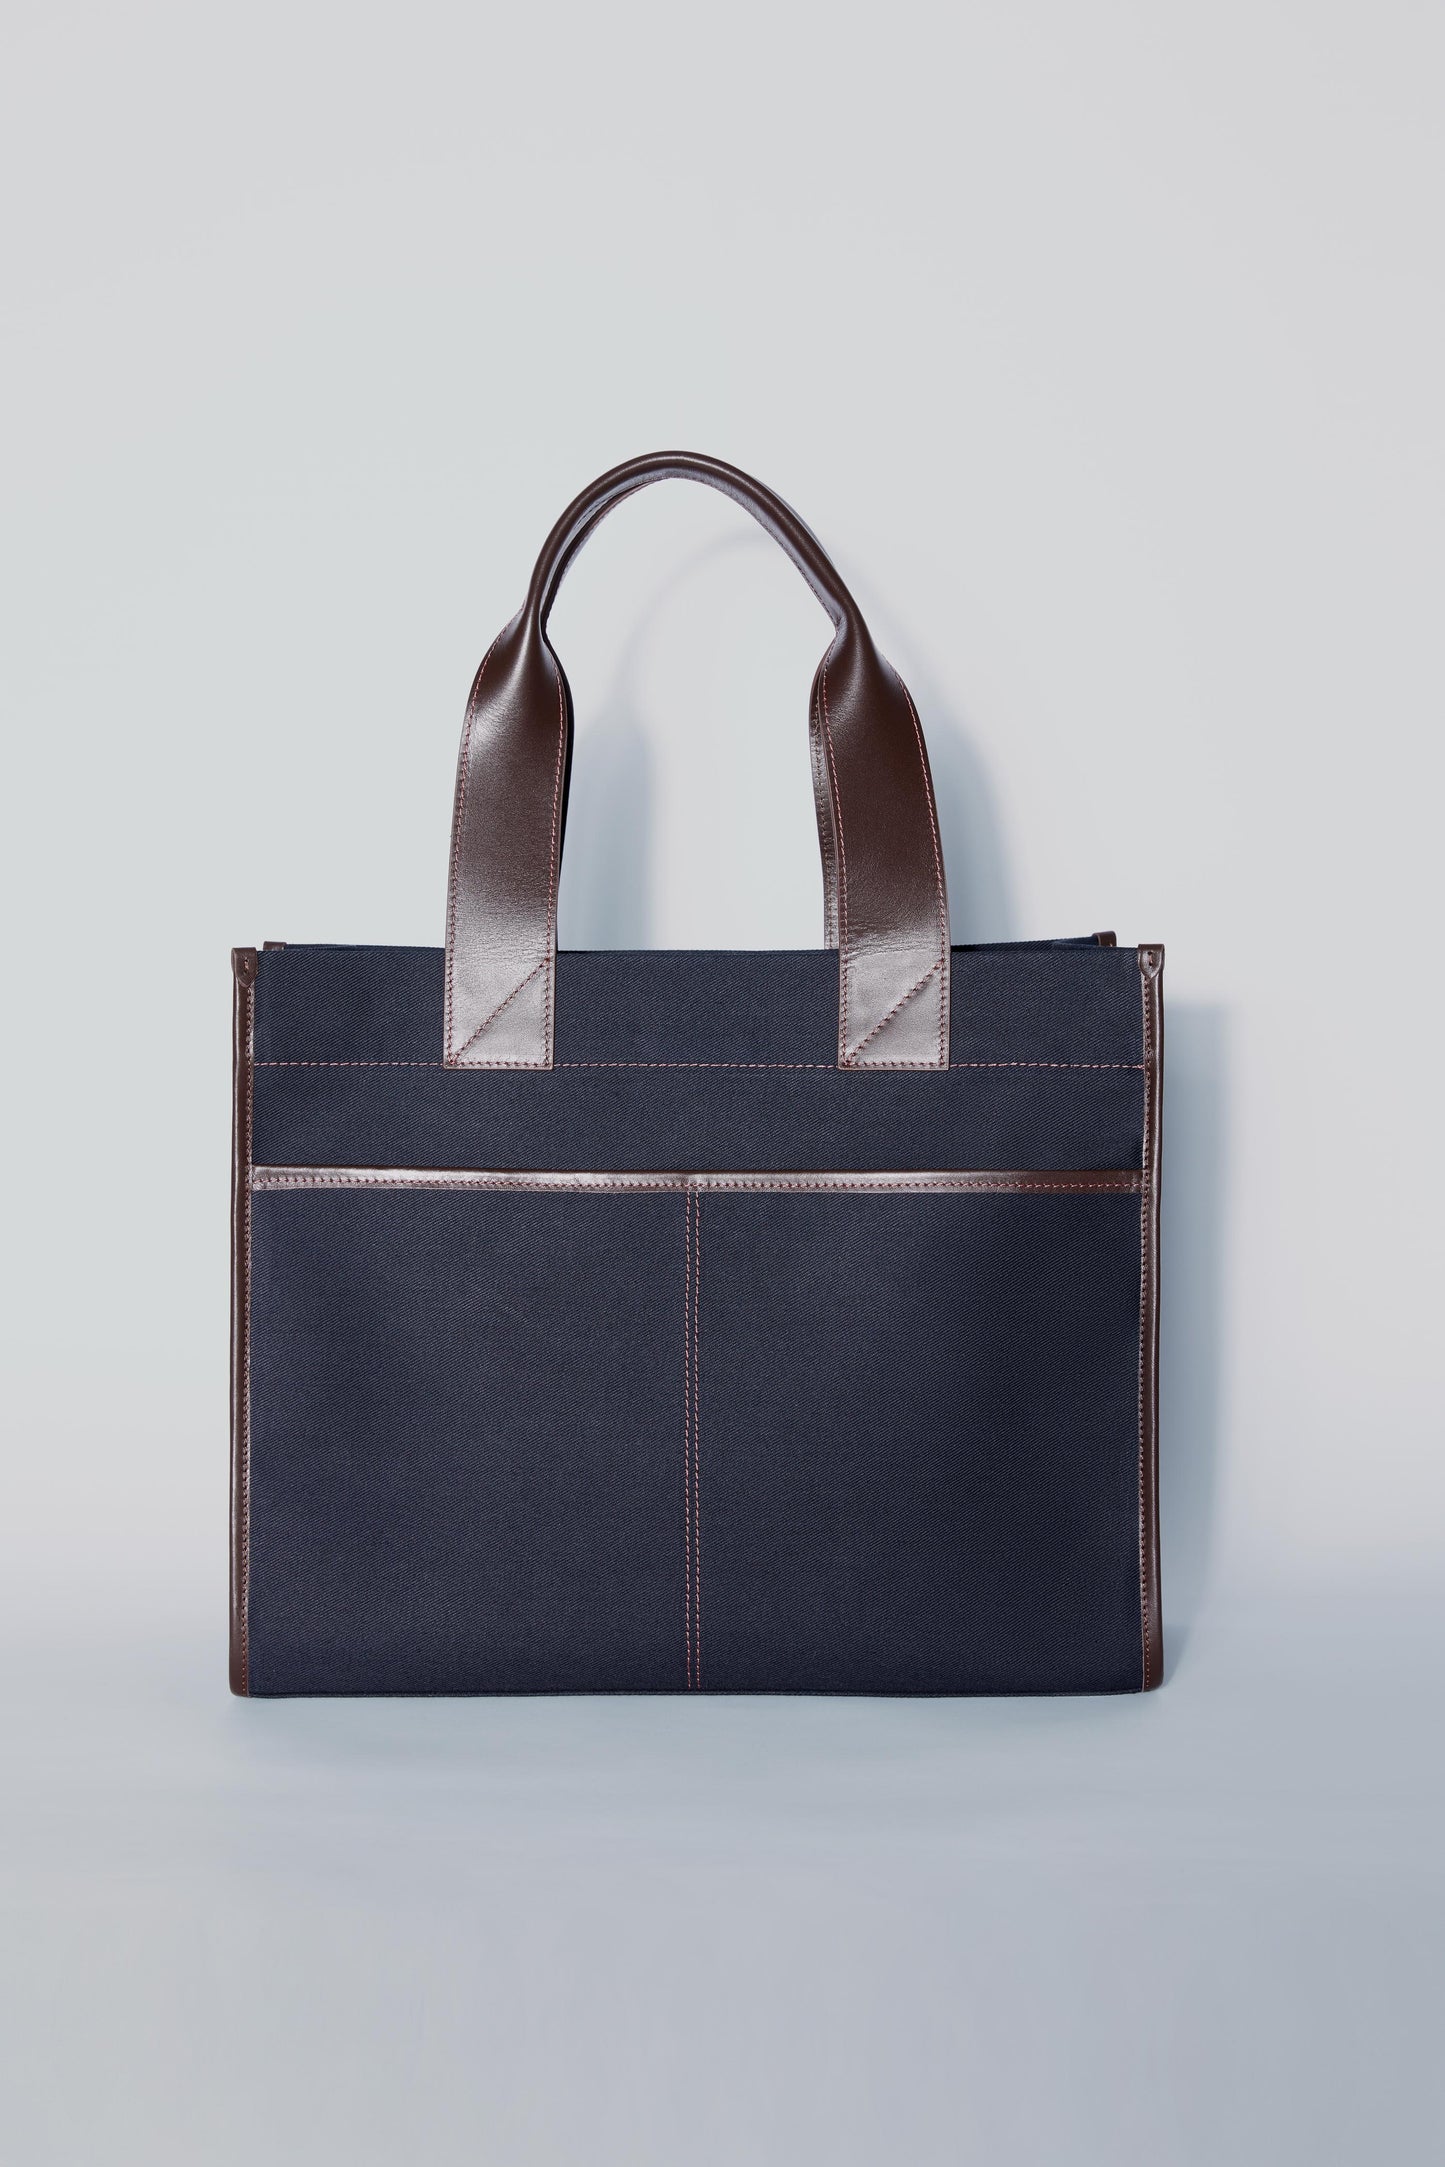 STITCHED POCKET MAXI TOTE IN NAVY AND BROWN